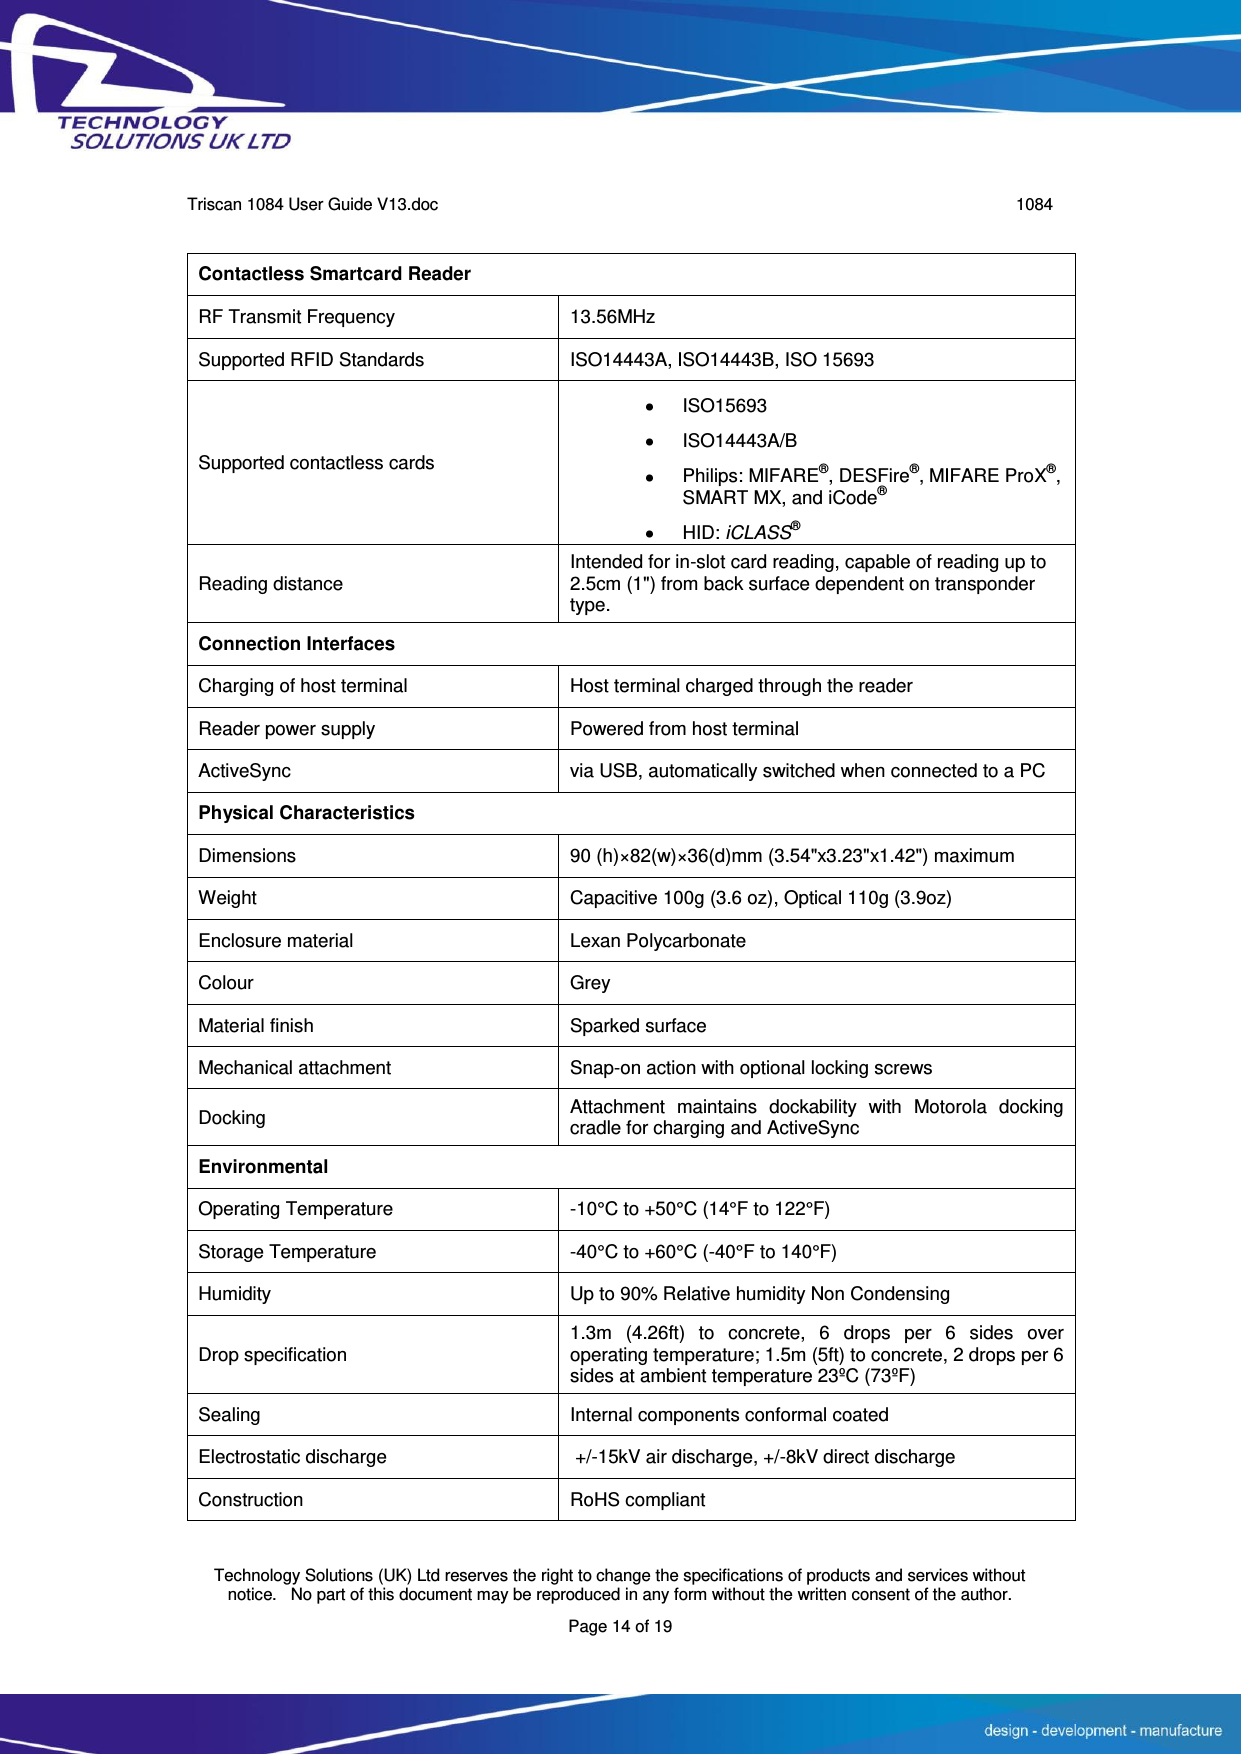      Triscan 1084 User Guide V13.doc   1084  Technology Solutions (UK) Ltd reserves the right to change the specifications of products and services without notice.   No part of this document may be reproduced in any form without the written consent of the author. Page 14 of 19  Contactless Smartcard Reader RF Transmit Frequency   13.56MHz   Supported RFID Standards   ISO14443A, ISO14443B, ISO 15693 Supported contactless cards   ISO15693   ISO14443A/B   Philips: MIFARE®, DESFire®, MIFARE ProX®, SMART MX, and iCode®   HID: iCLASS® Reading distance   Intended for in-slot card reading, capable of reading up to 2.5cm (1&quot;) from back surface dependent on transponder type. Connection Interfaces Charging of host terminal Host terminal charged through the reader Reader power supply Powered from host terminal ActiveSync via USB, automatically switched when connected to a PC Physical Characteristics Dimensions 90 (h)×82(w)×36(d)mm (3.54&quot;x3.23&quot;x1.42&quot;) maximum Weight Capacitive 100g (3.6 oz), Optical 110g (3.9oz) Enclosure material Lexan Polycarbonate Colour Grey Material finish Sparked surface Mechanical attachment Snap-on action with optional locking screws Docking Attachment  maintains  dockability  with  Motorola  docking cradle for charging and ActiveSync Environmental Operating Temperature -10°C to +50°C (14°F to 122°F) Storage Temperature -40°C to +60°C (-40°F to 140°F) Humidity Up to 90% Relative humidity Non Condensing Drop specification 1.3m  (4.26ft)  to  concrete,  6  drops  per  6  sides  over operating temperature; 1.5m (5ft) to concrete, 2 drops per 6 sides at ambient temperature 23ºC (73ºF) Sealing Internal components conformal coated Electrostatic discharge  +/-15kV air discharge, +/-8kV direct discharge Construction RoHS compliant 